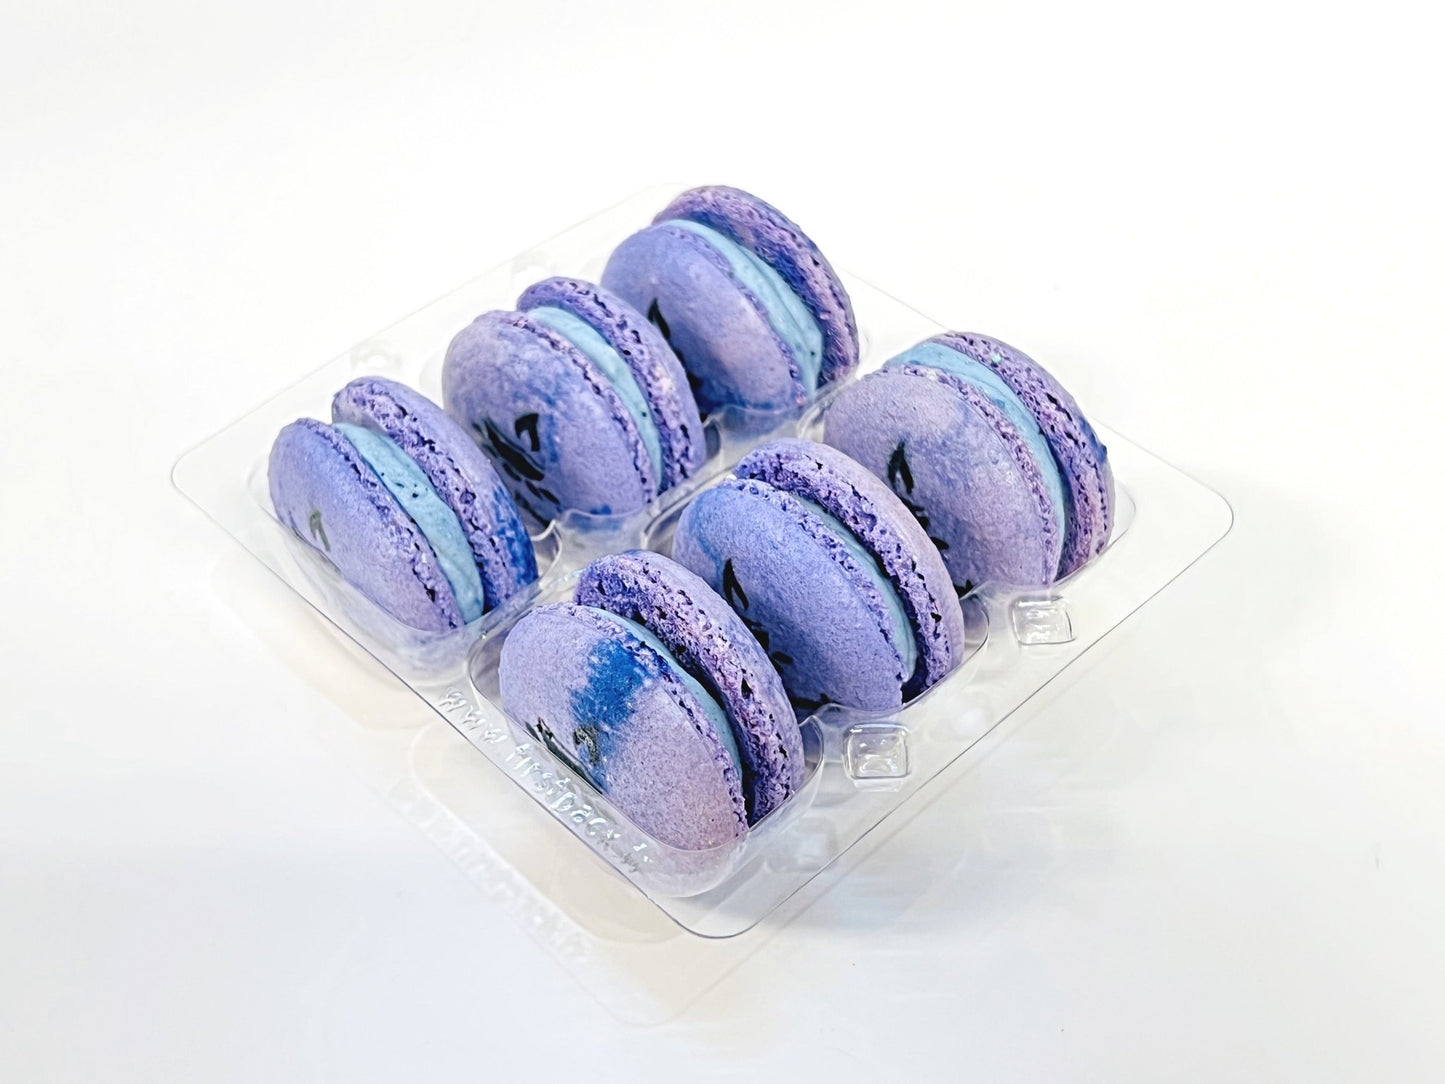 Happy Diwali French Macaron | Available in 6, 12 & 24 Pack | A Perfect Gift for Diwali Celebrations - Macaron CentraleButterfly Pea6 pack